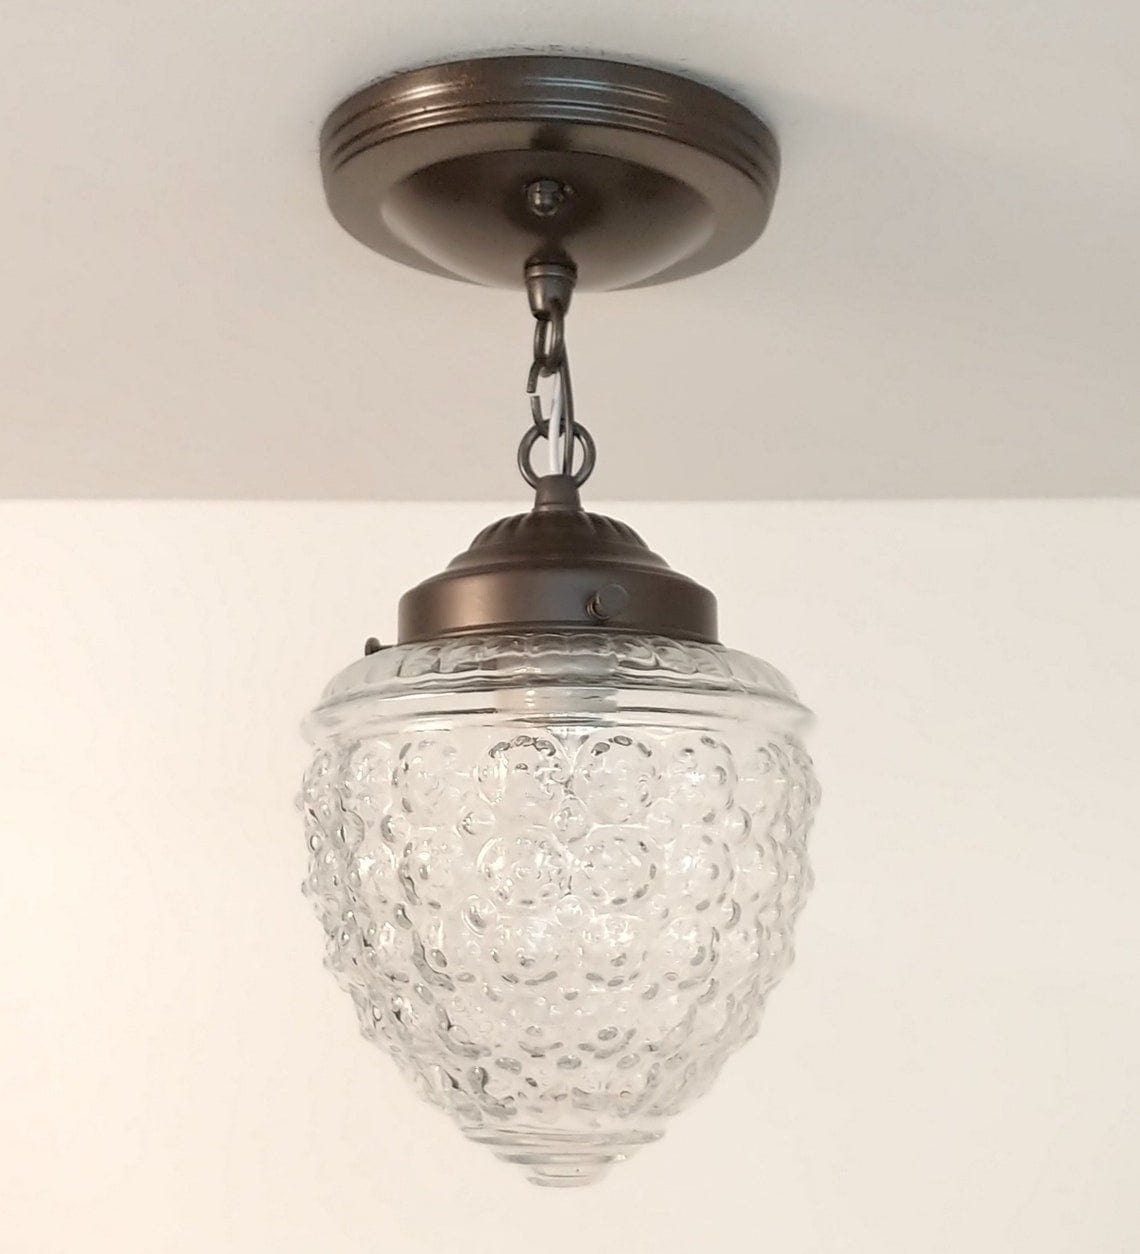 Authentic Vintage Chain Glass Ceiling Light The Lamp Goods